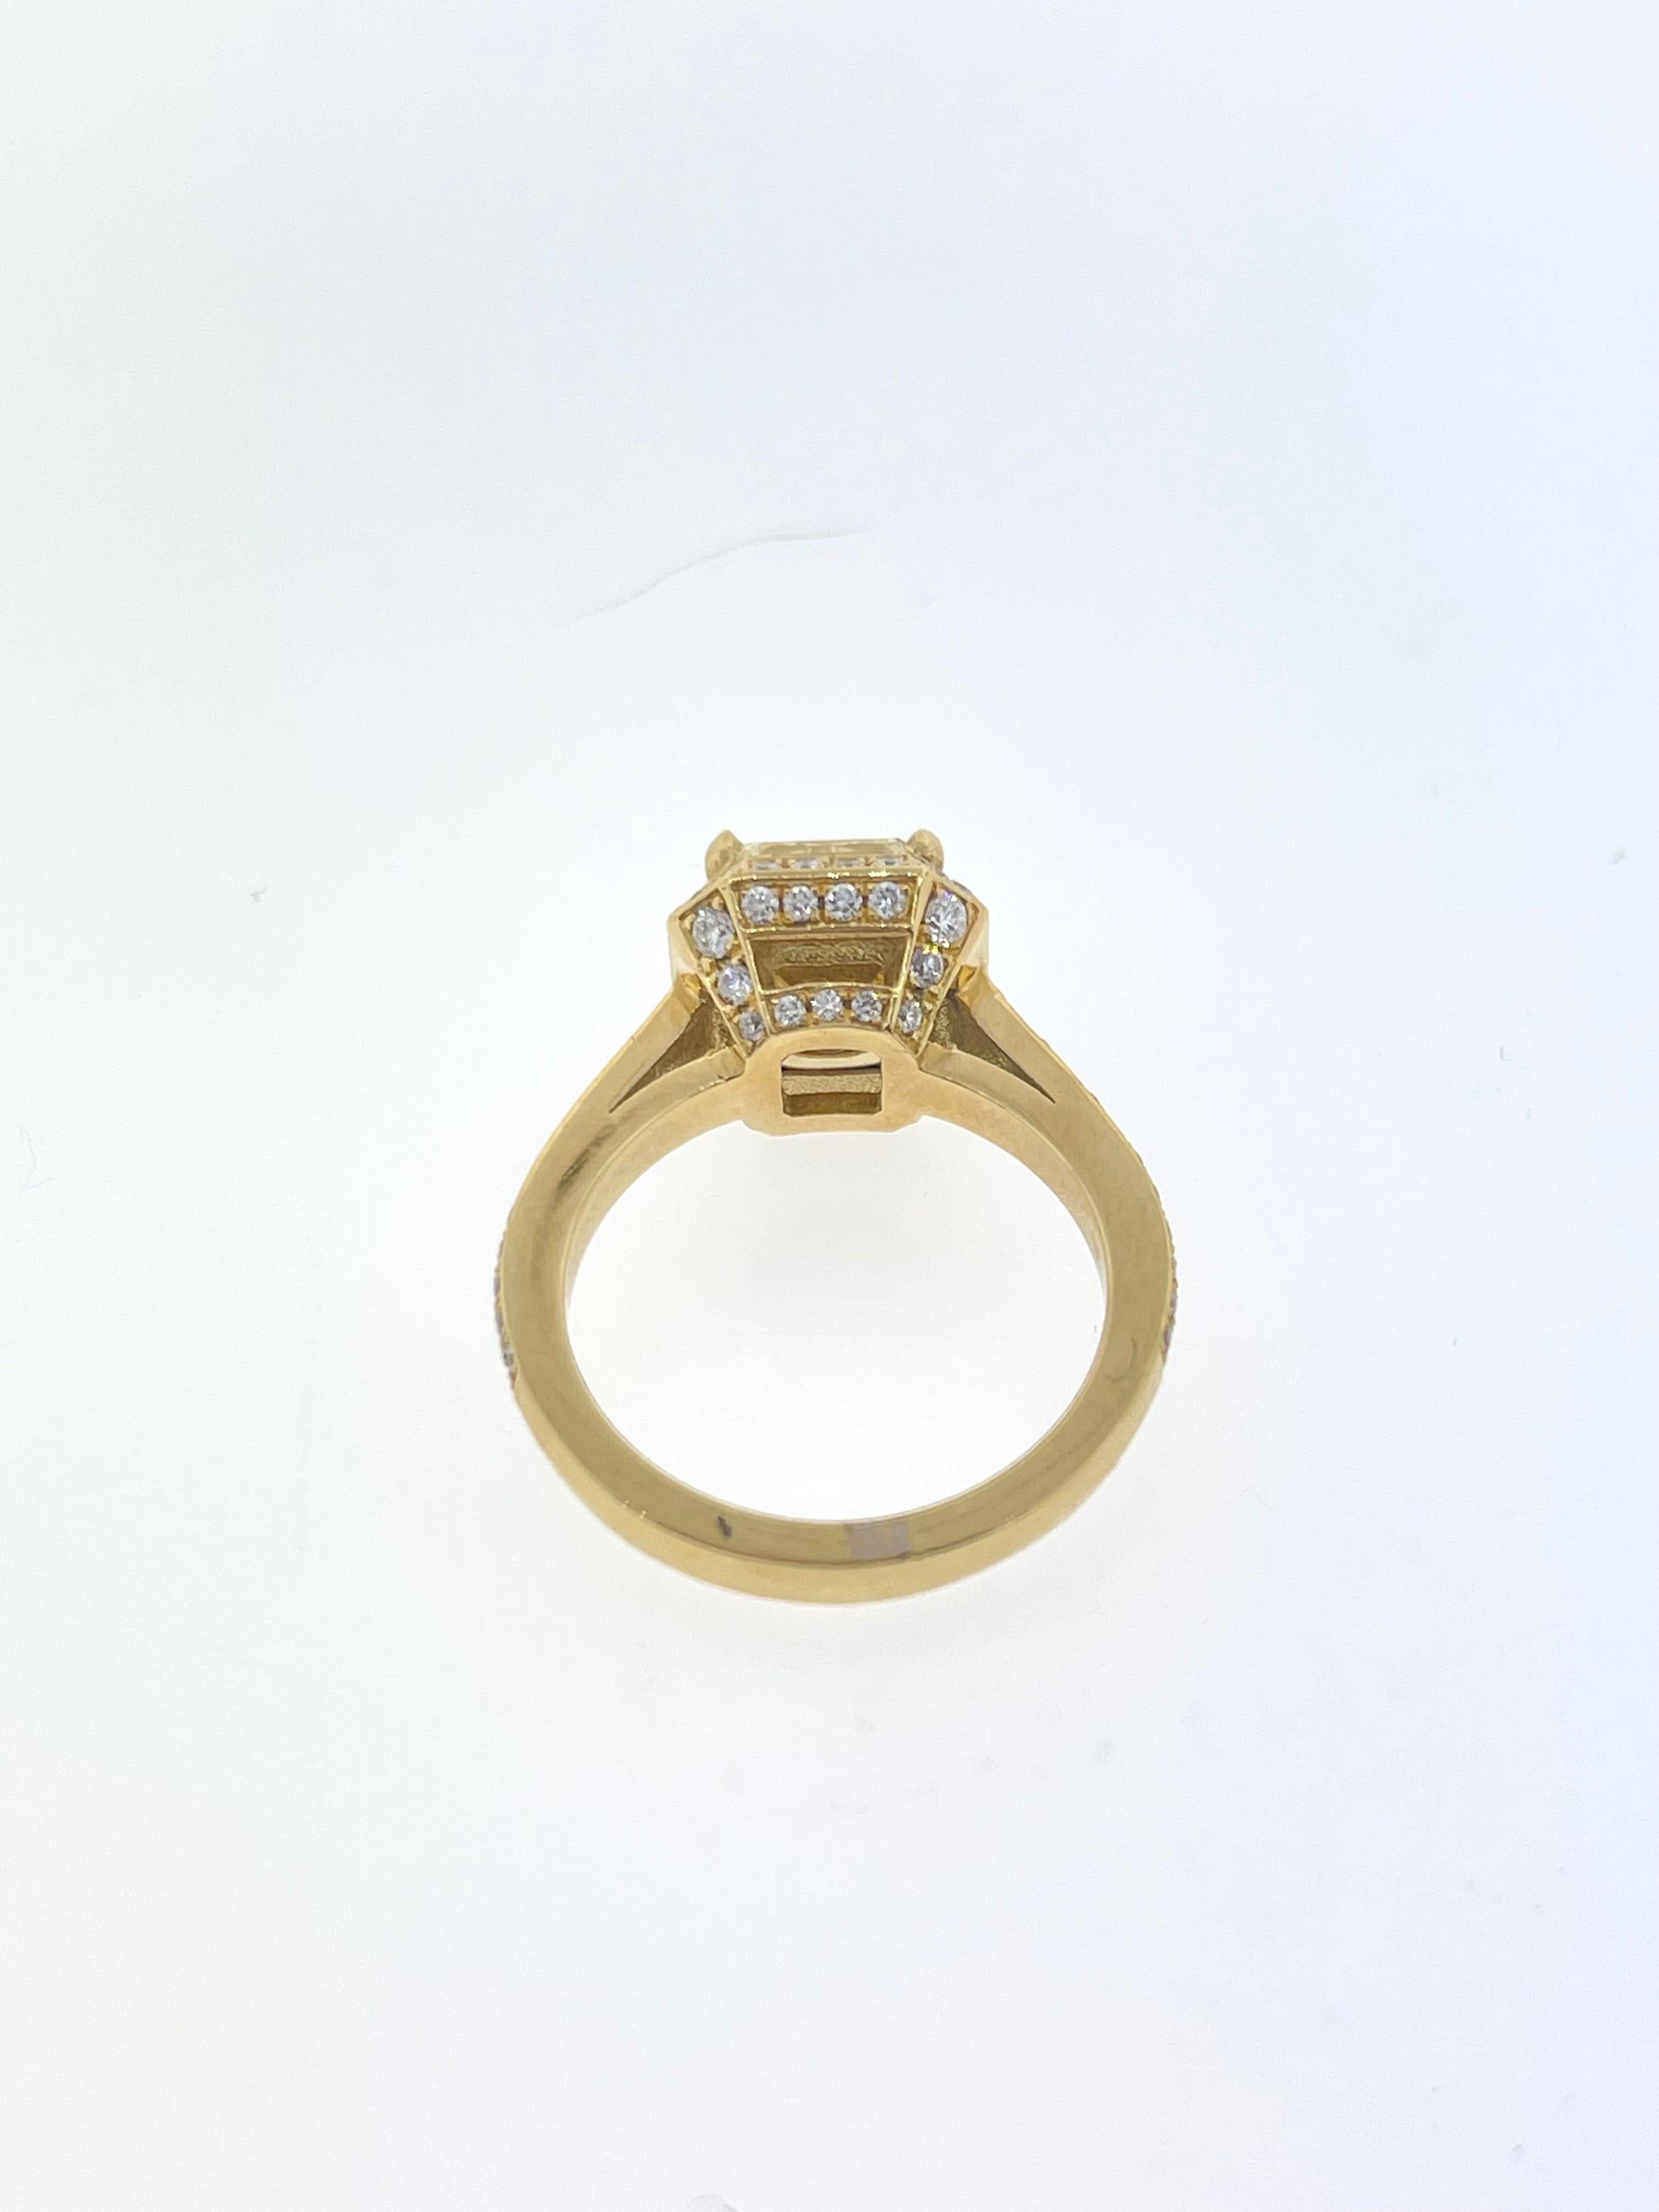 Fancy Yellow Radiant Cut Diamond Engagement Ring For Sale 1